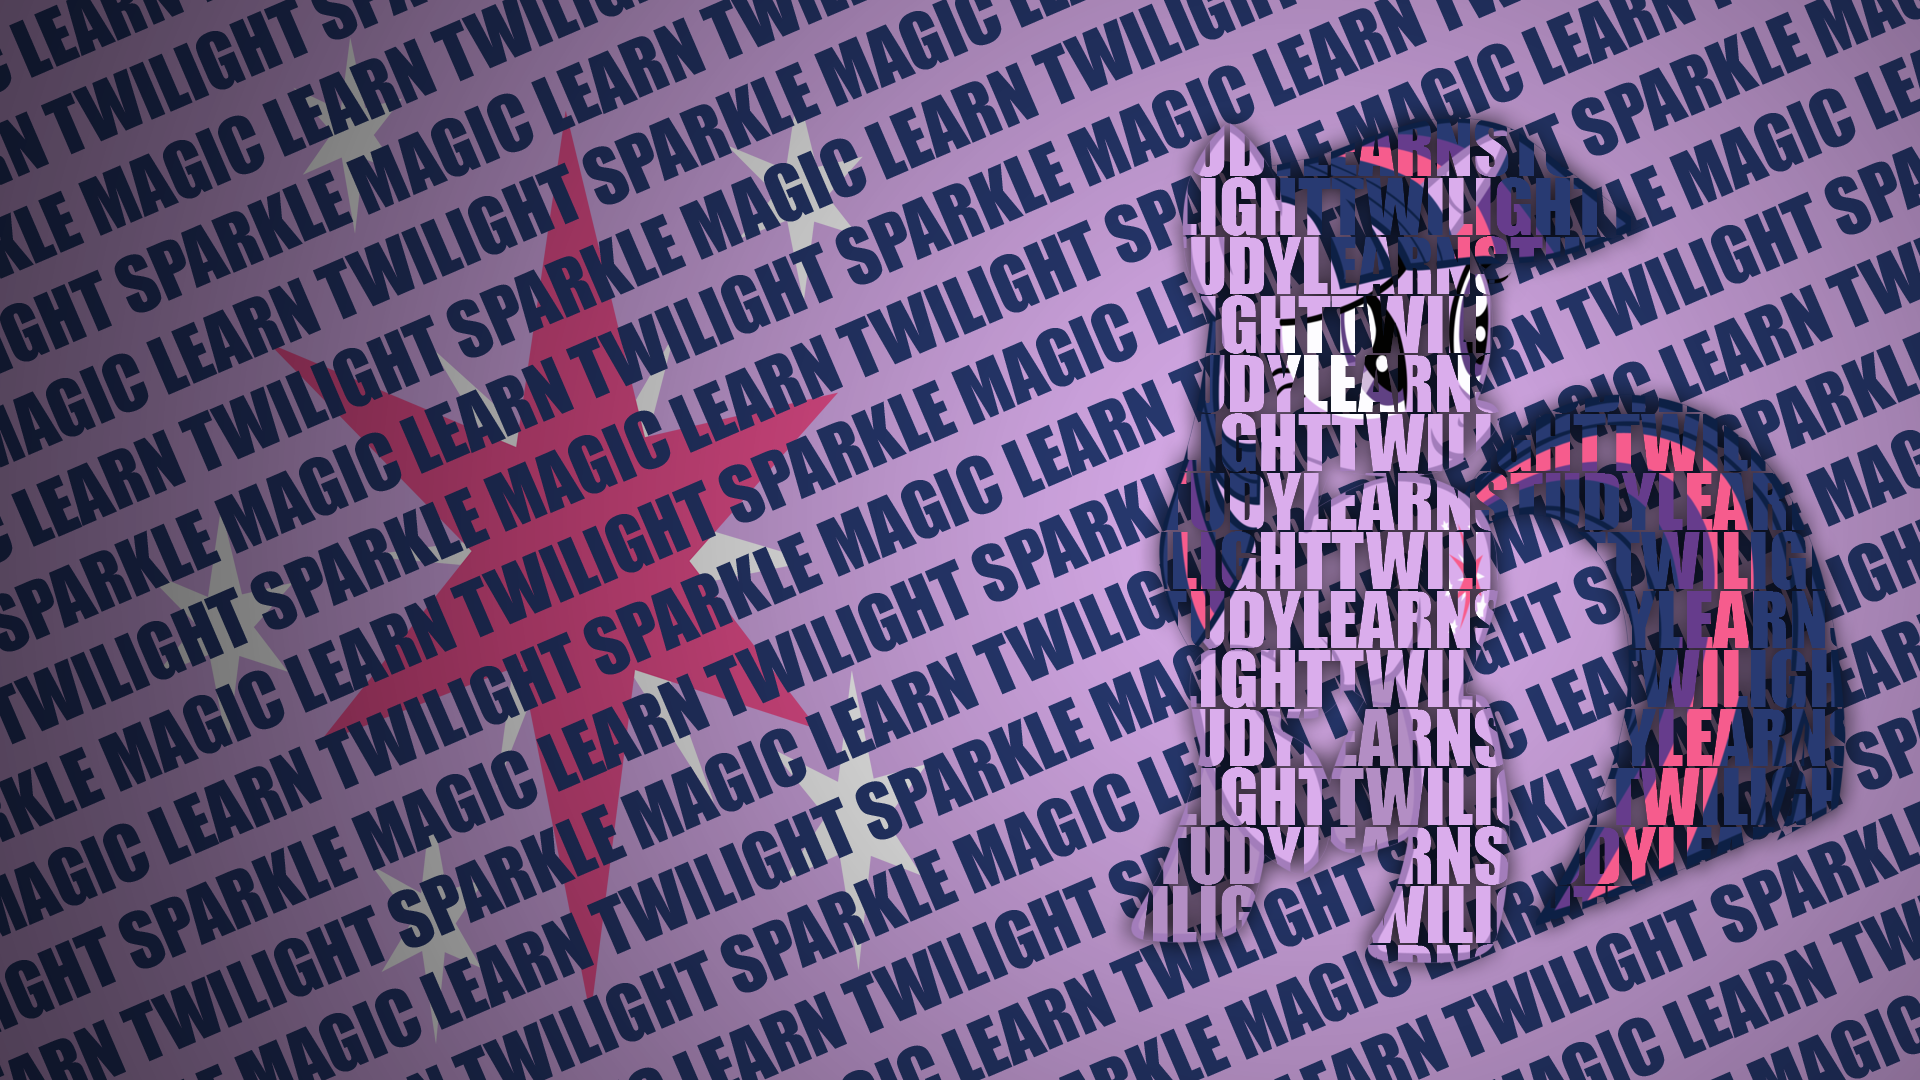 Twilight Sparkle Typography Wallpaper [1920x1080] by CoRnFlAkEs369